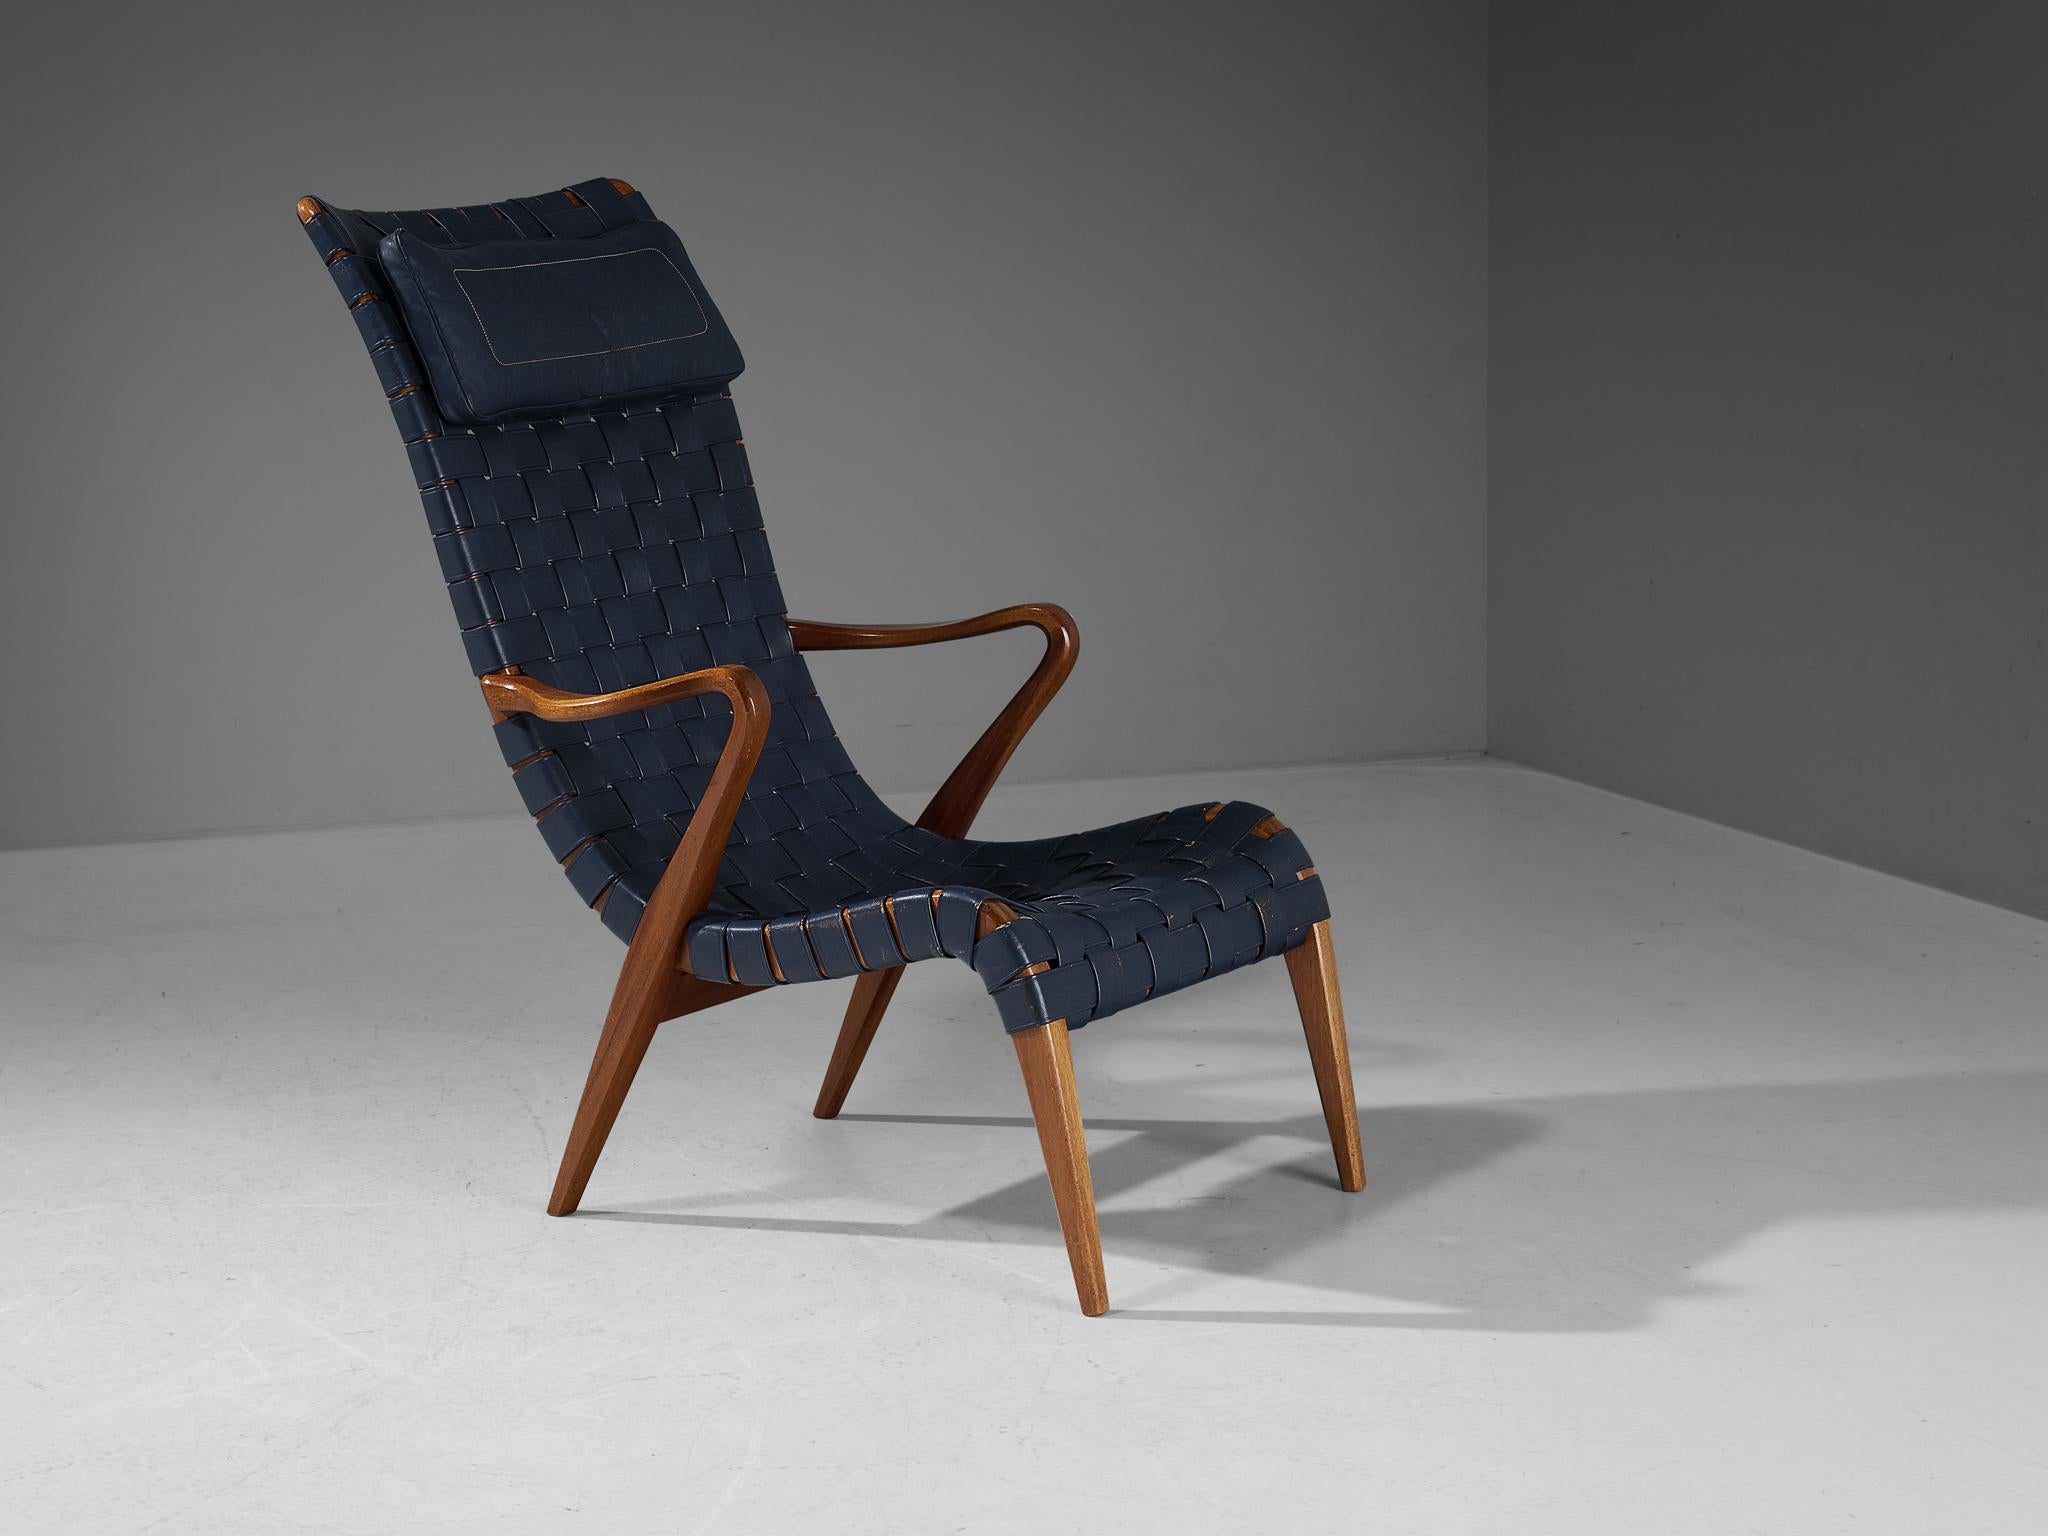 Axel Larsson for Svenska Möbelfabrikeren Bodafors, lounge chair model 1207/5-119, leather, teak, Sweden, 1950s.

Beautiful high back lounge chair designed by Axel Larsson. The frame of this chair is very sleek and has bold lining throughout the